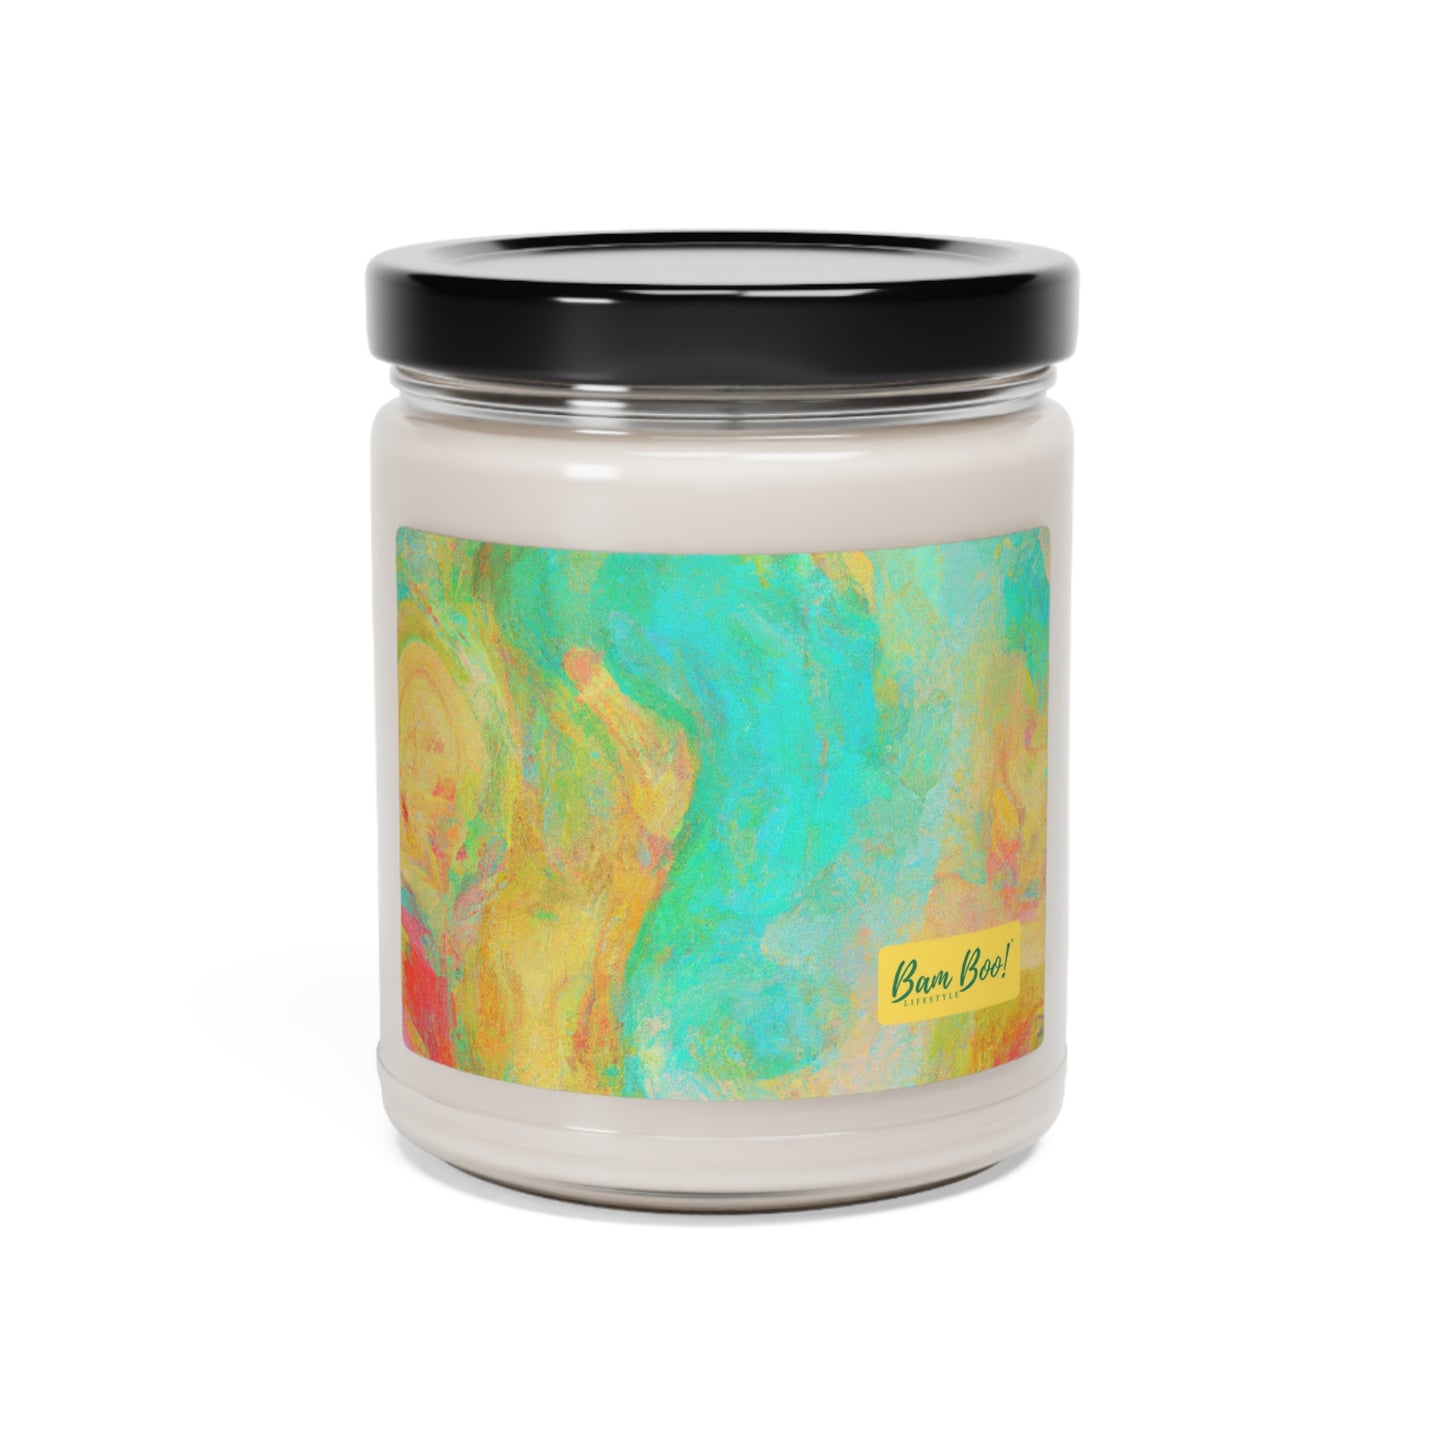 "The Glow of Nature" - Bam Boo! Lifestyle Eco-friendly Soy Candle